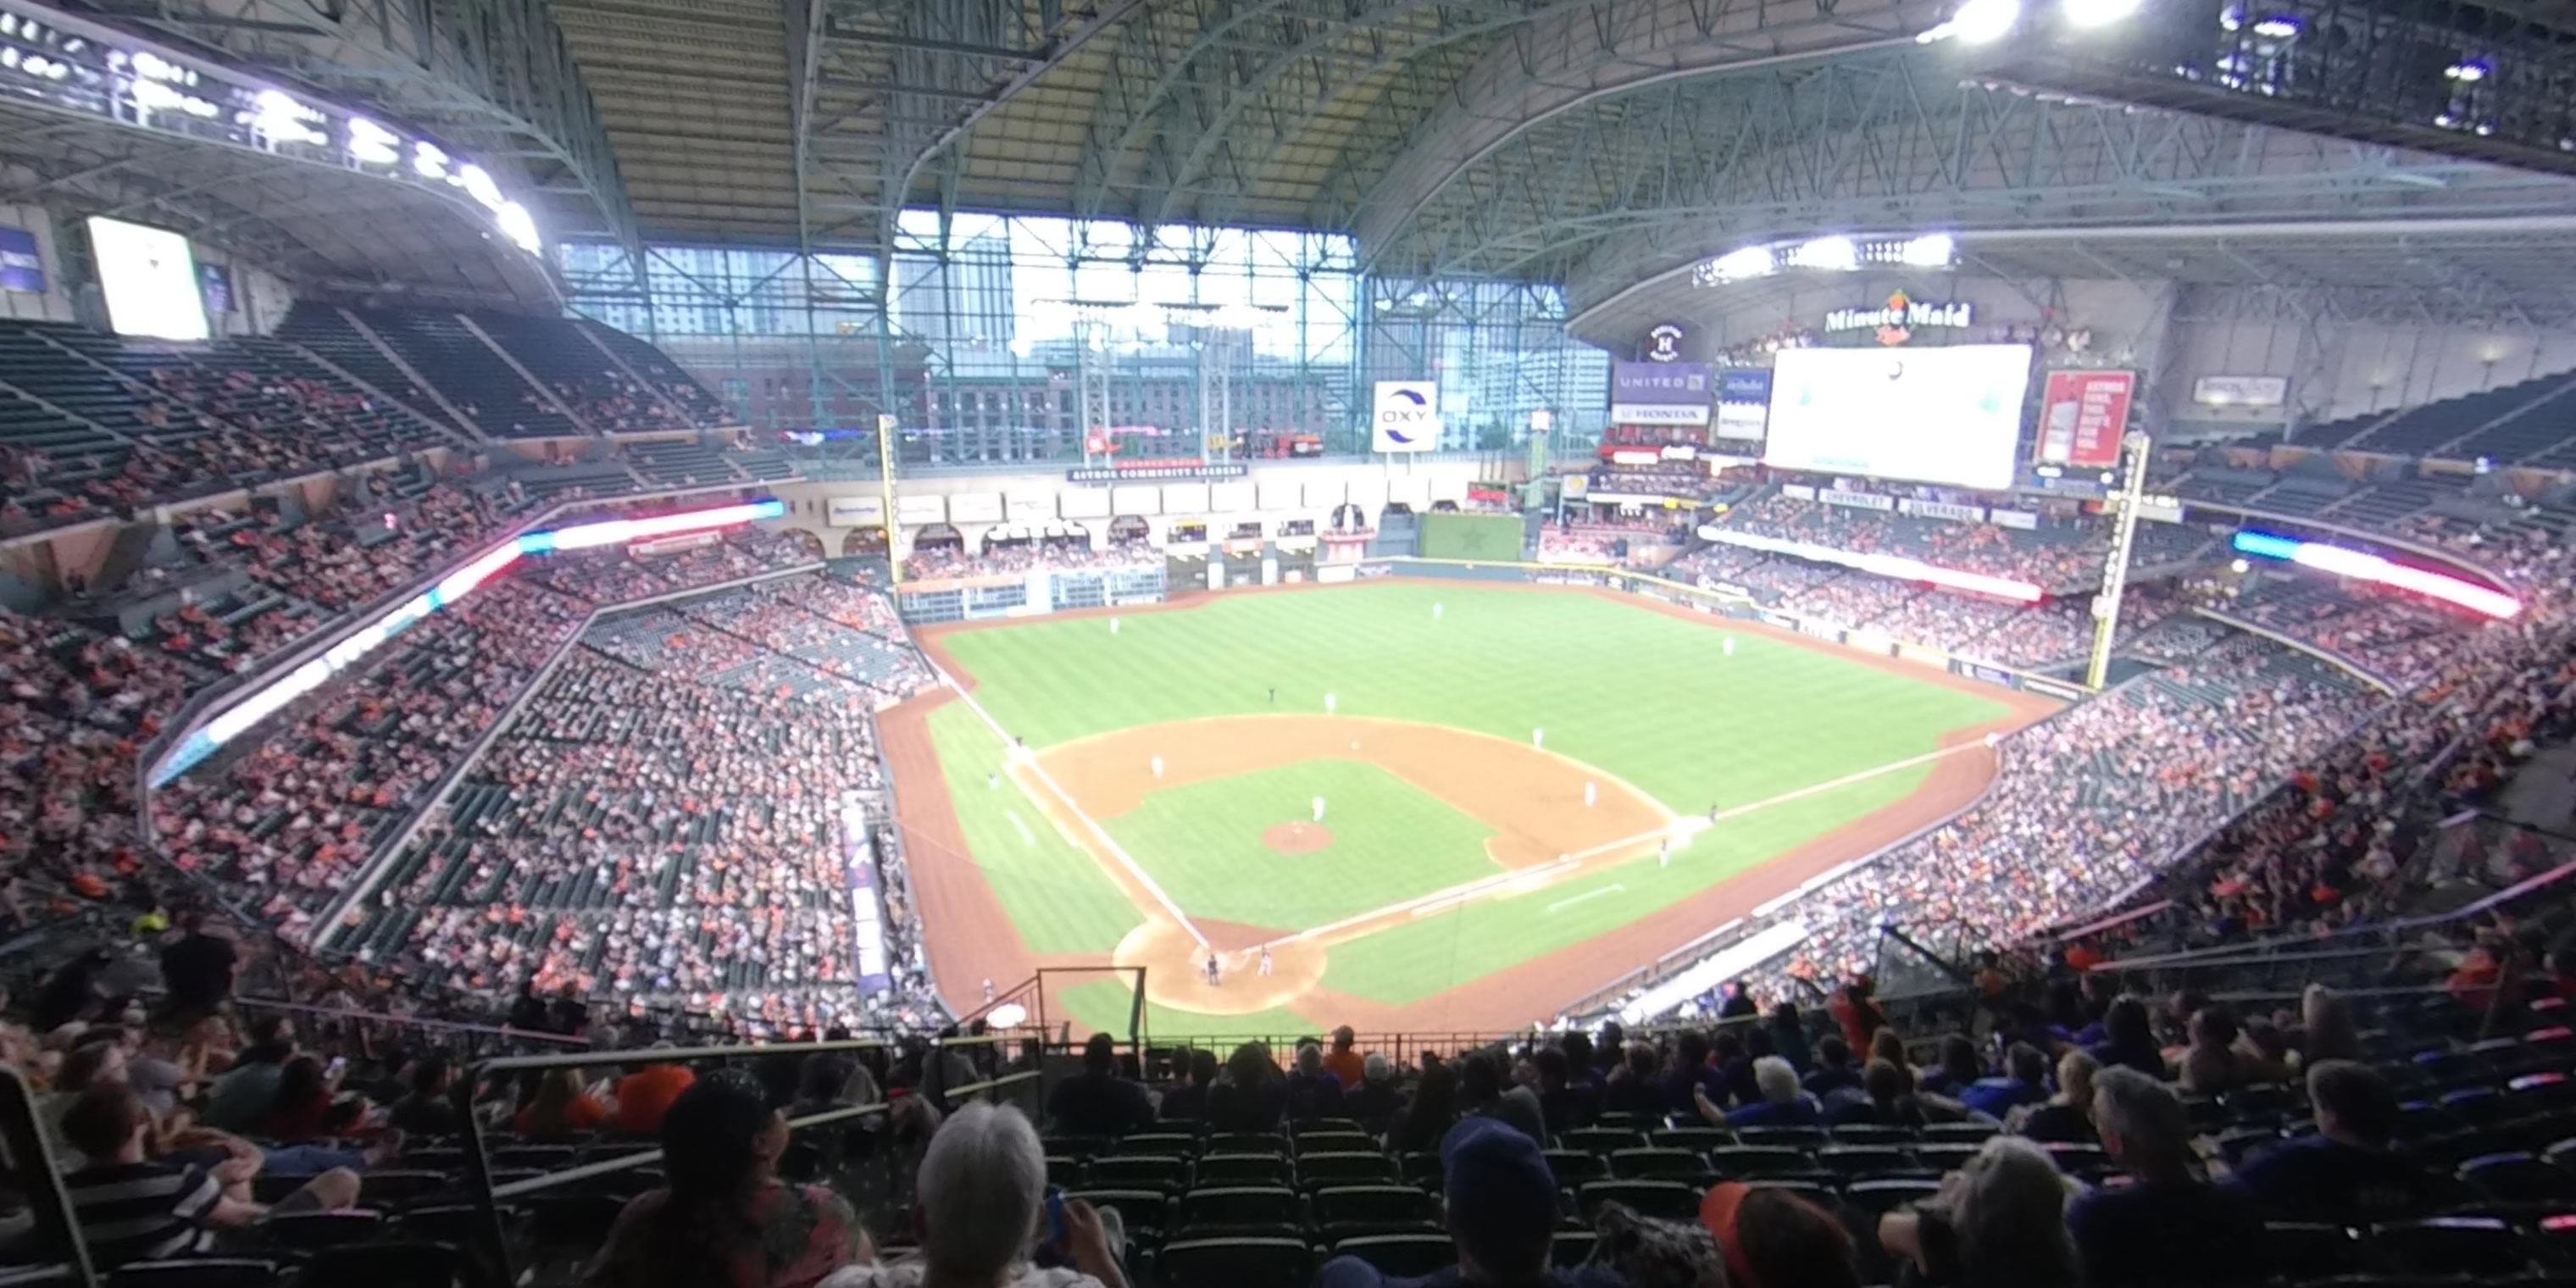 section 420 panoramic seat view  for baseball - minute maid park